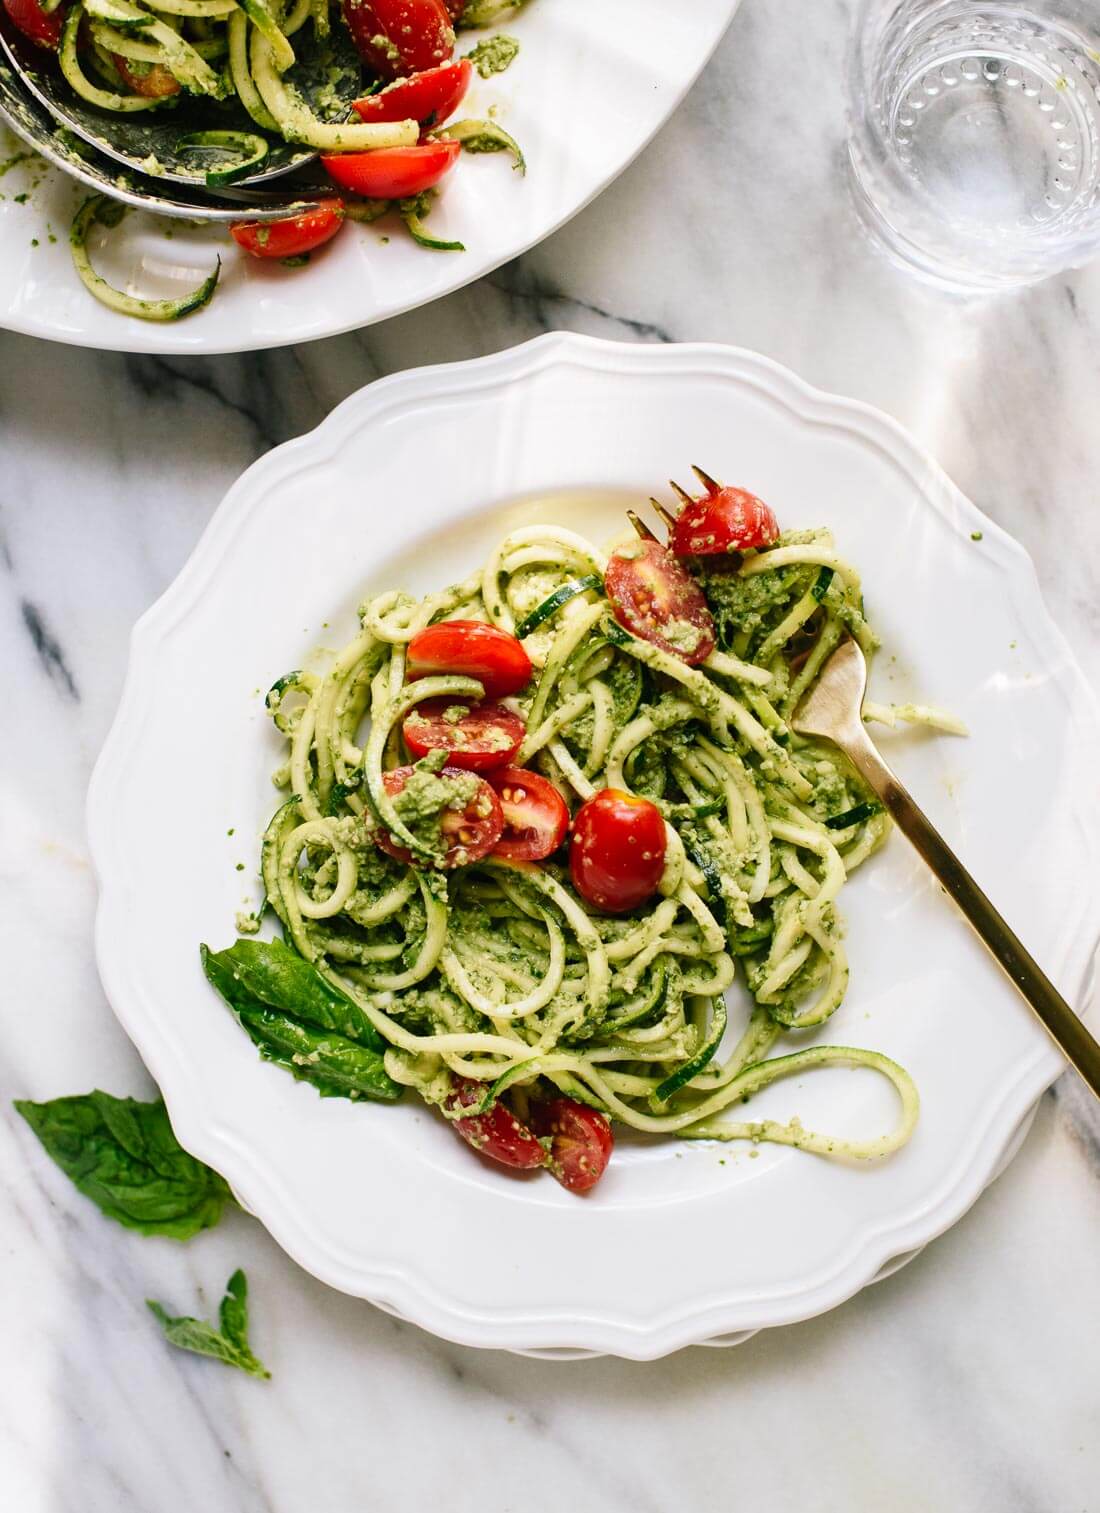 Delicious zucchini noodles (zoodles) with pesto and tomatoes - cookieandkate.com